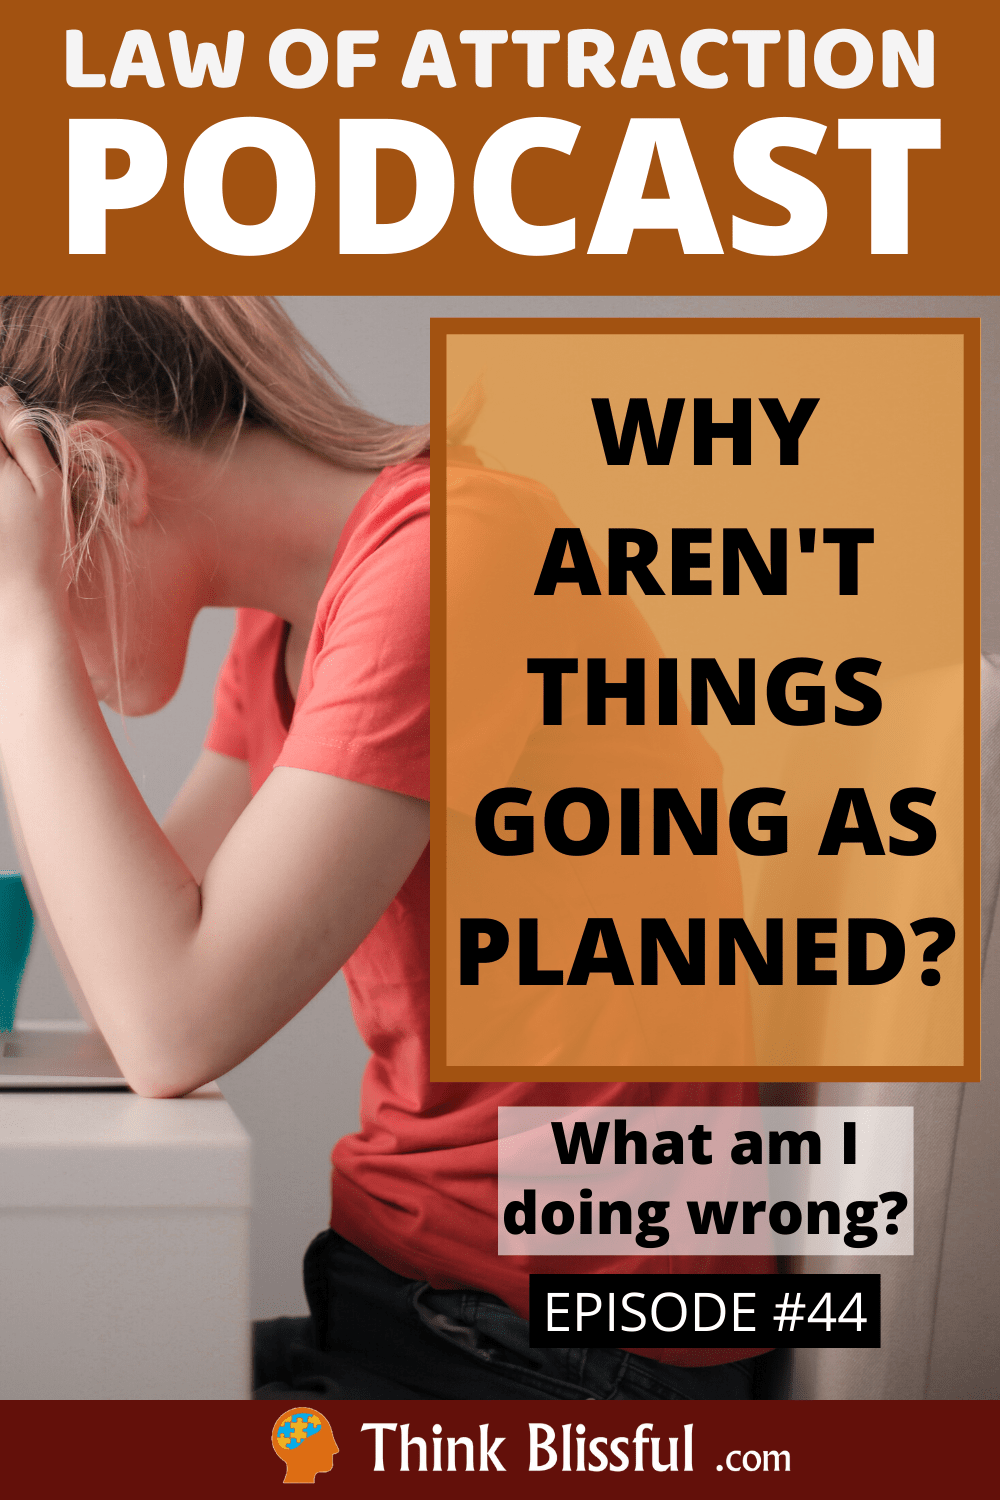 Why Aren't Things Going As Planned?